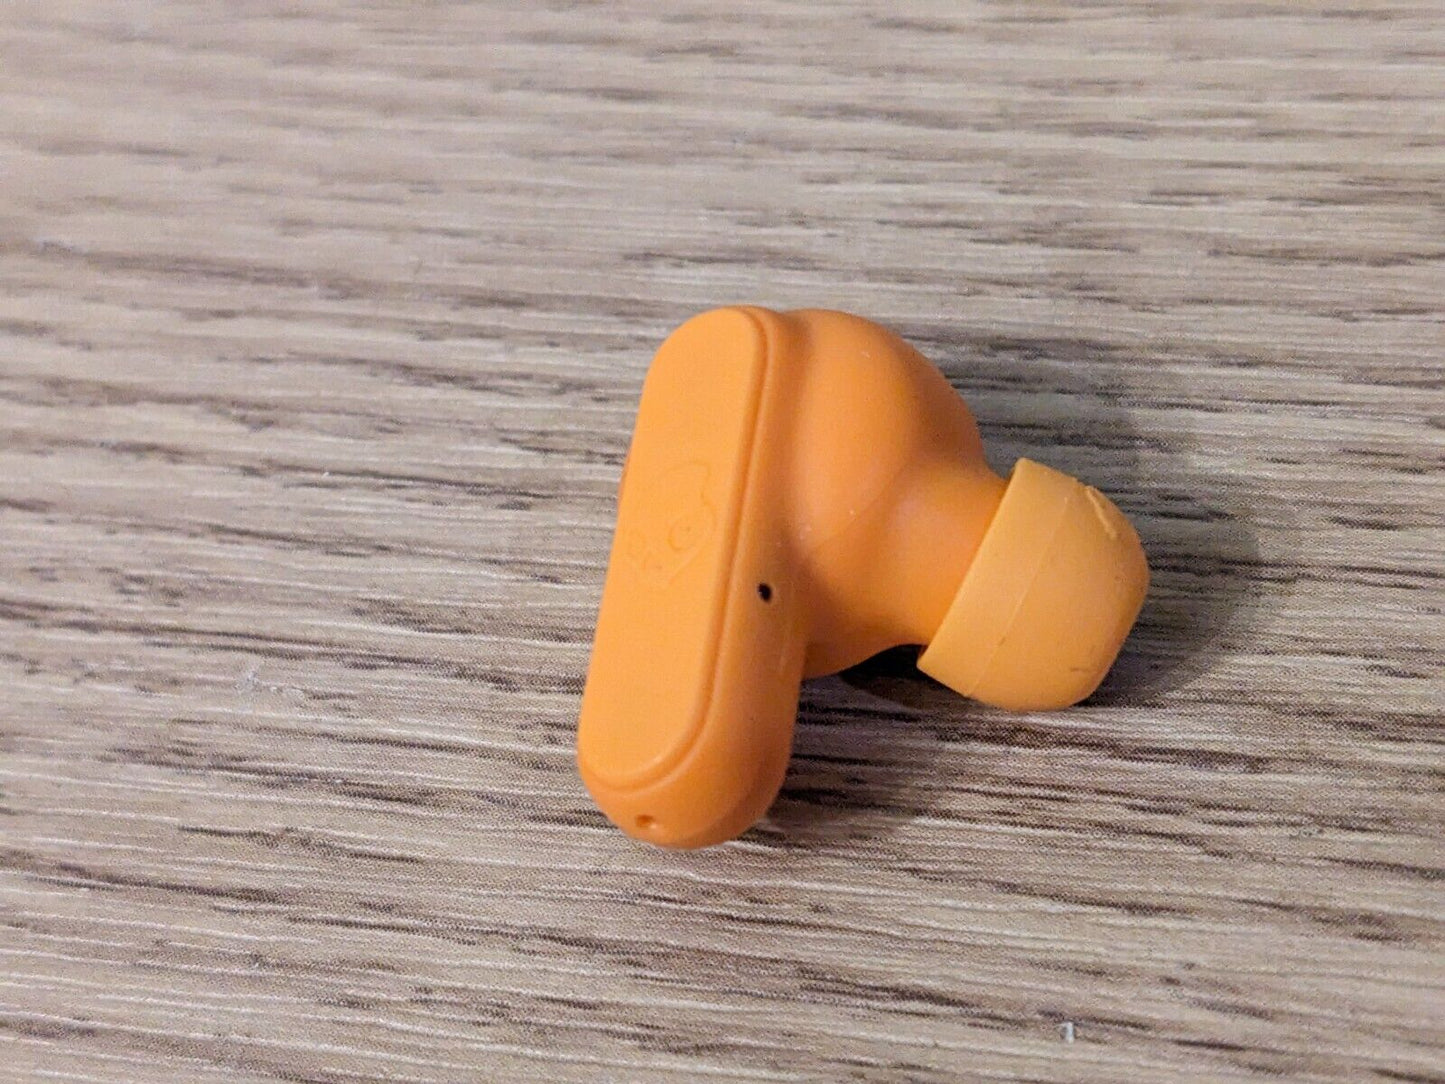 Skullcandy Dime replacement parts: charging case, left/right earbuds